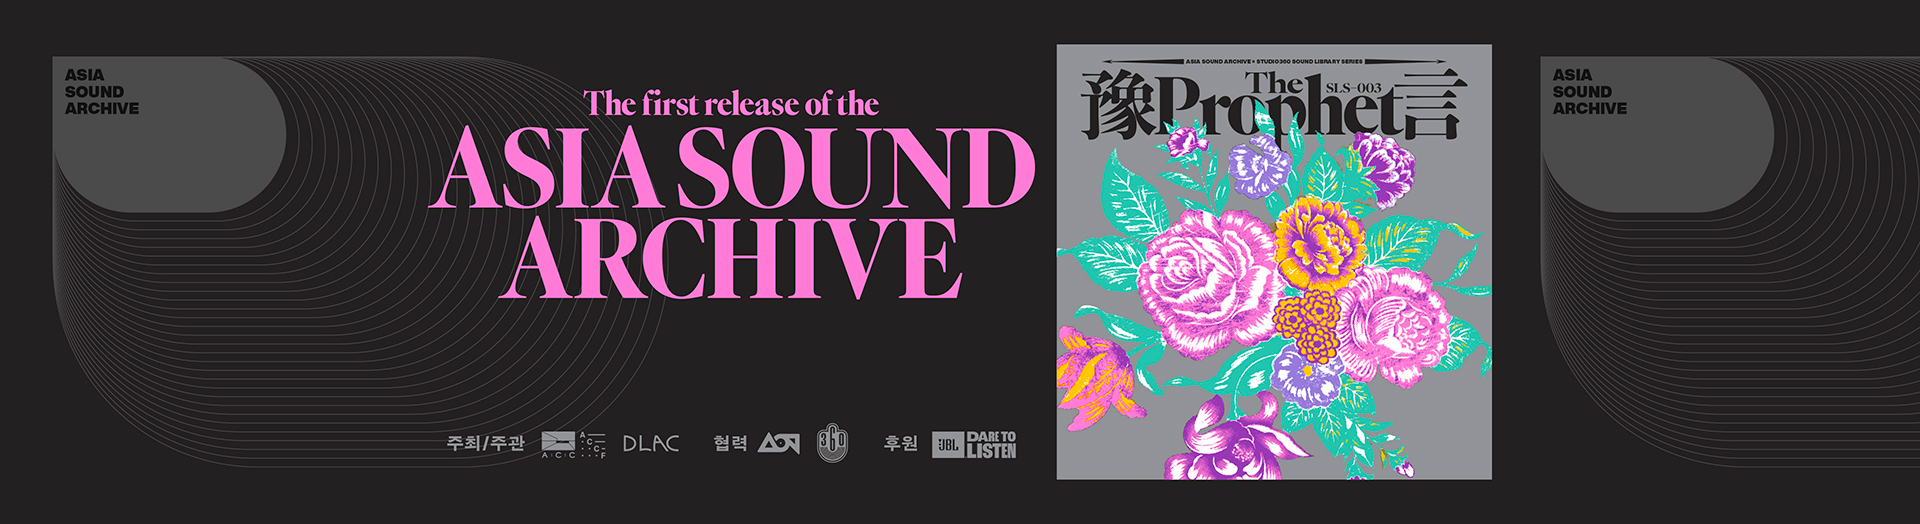 ASIA SOUND ARCHIVE Project